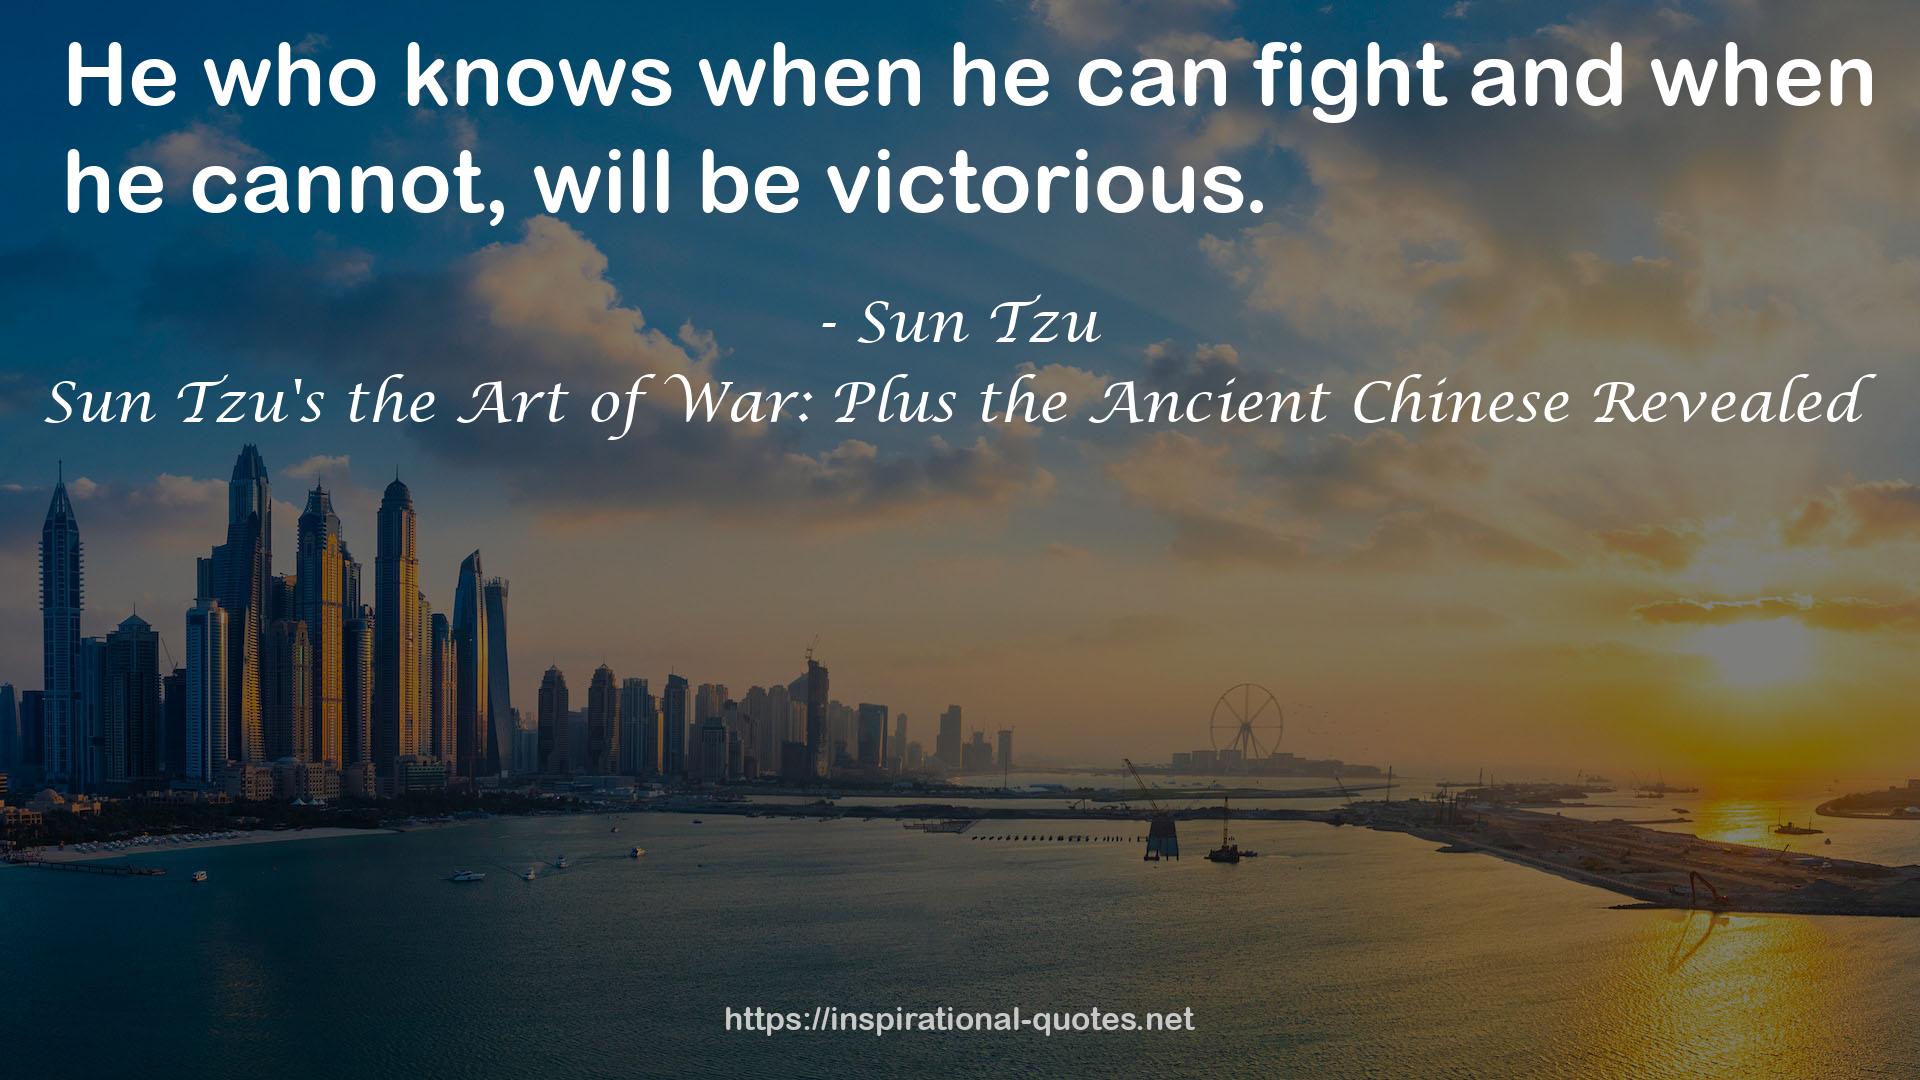 Sun Tzu's the Art of War: Plus the Ancient Chinese Revealed QUOTES